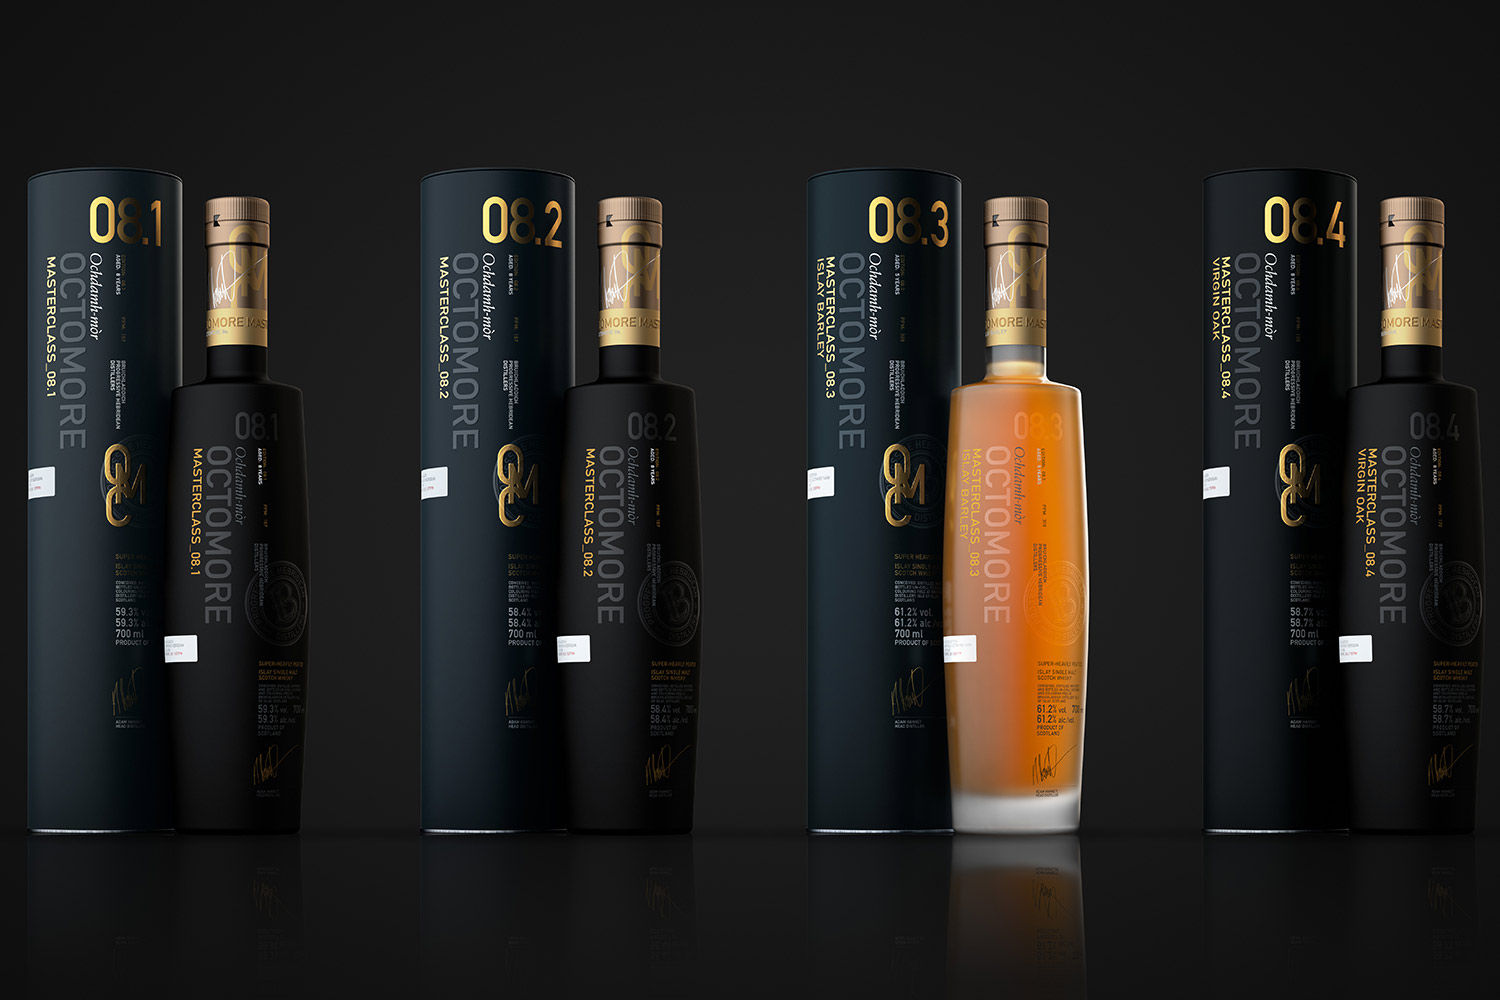 Bruichladdich claims ‘the world’s most heavily peated whisky’ with the Octomore 08.3